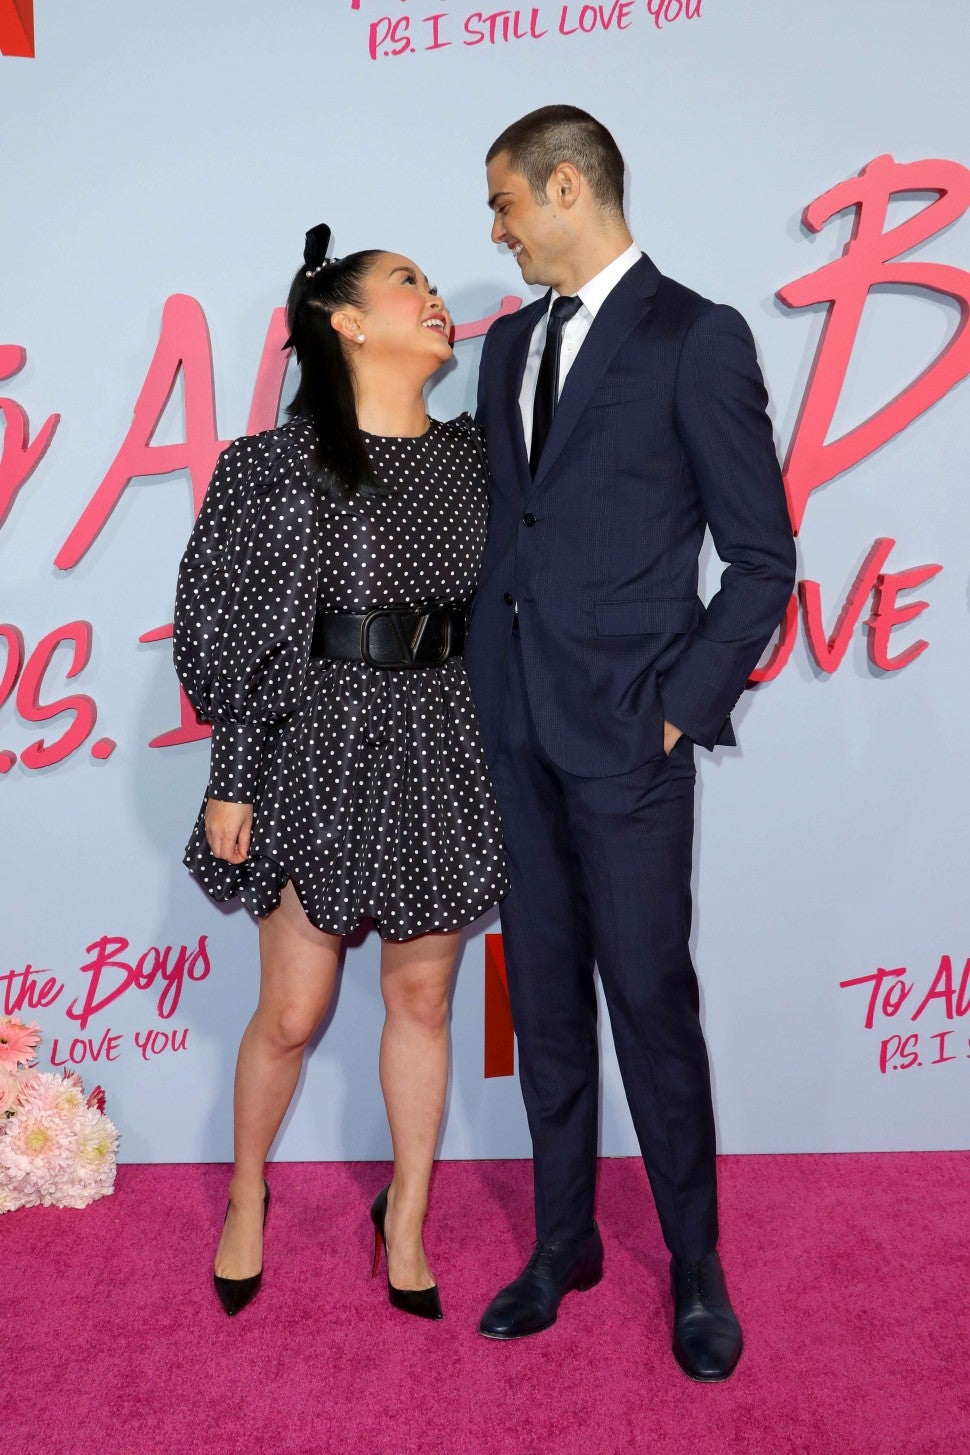 Lana Condor and Noah Centineo attend the Premiere of Netflix's 